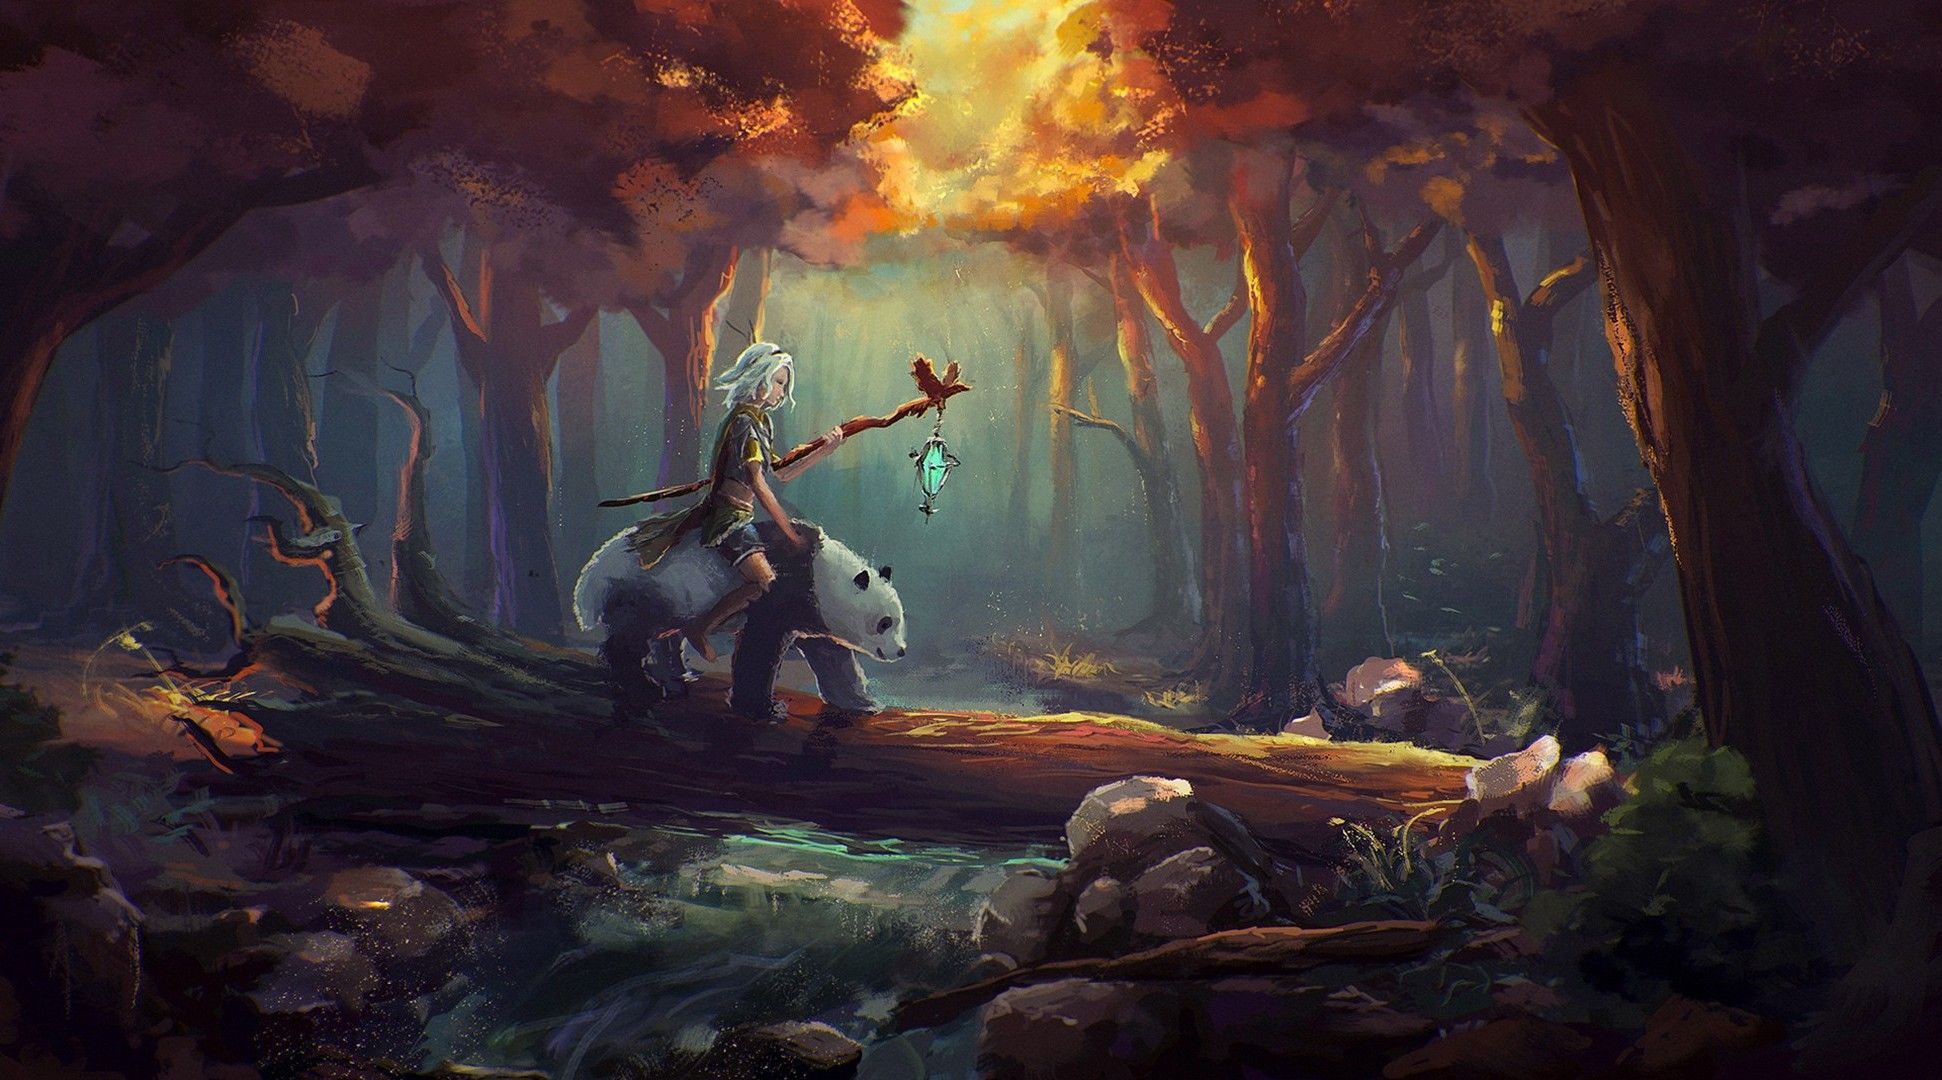 1942x1080 Fantasy Art Panda White Hair Forest Painting Wallpaper Hd Desktop And Mobile Background